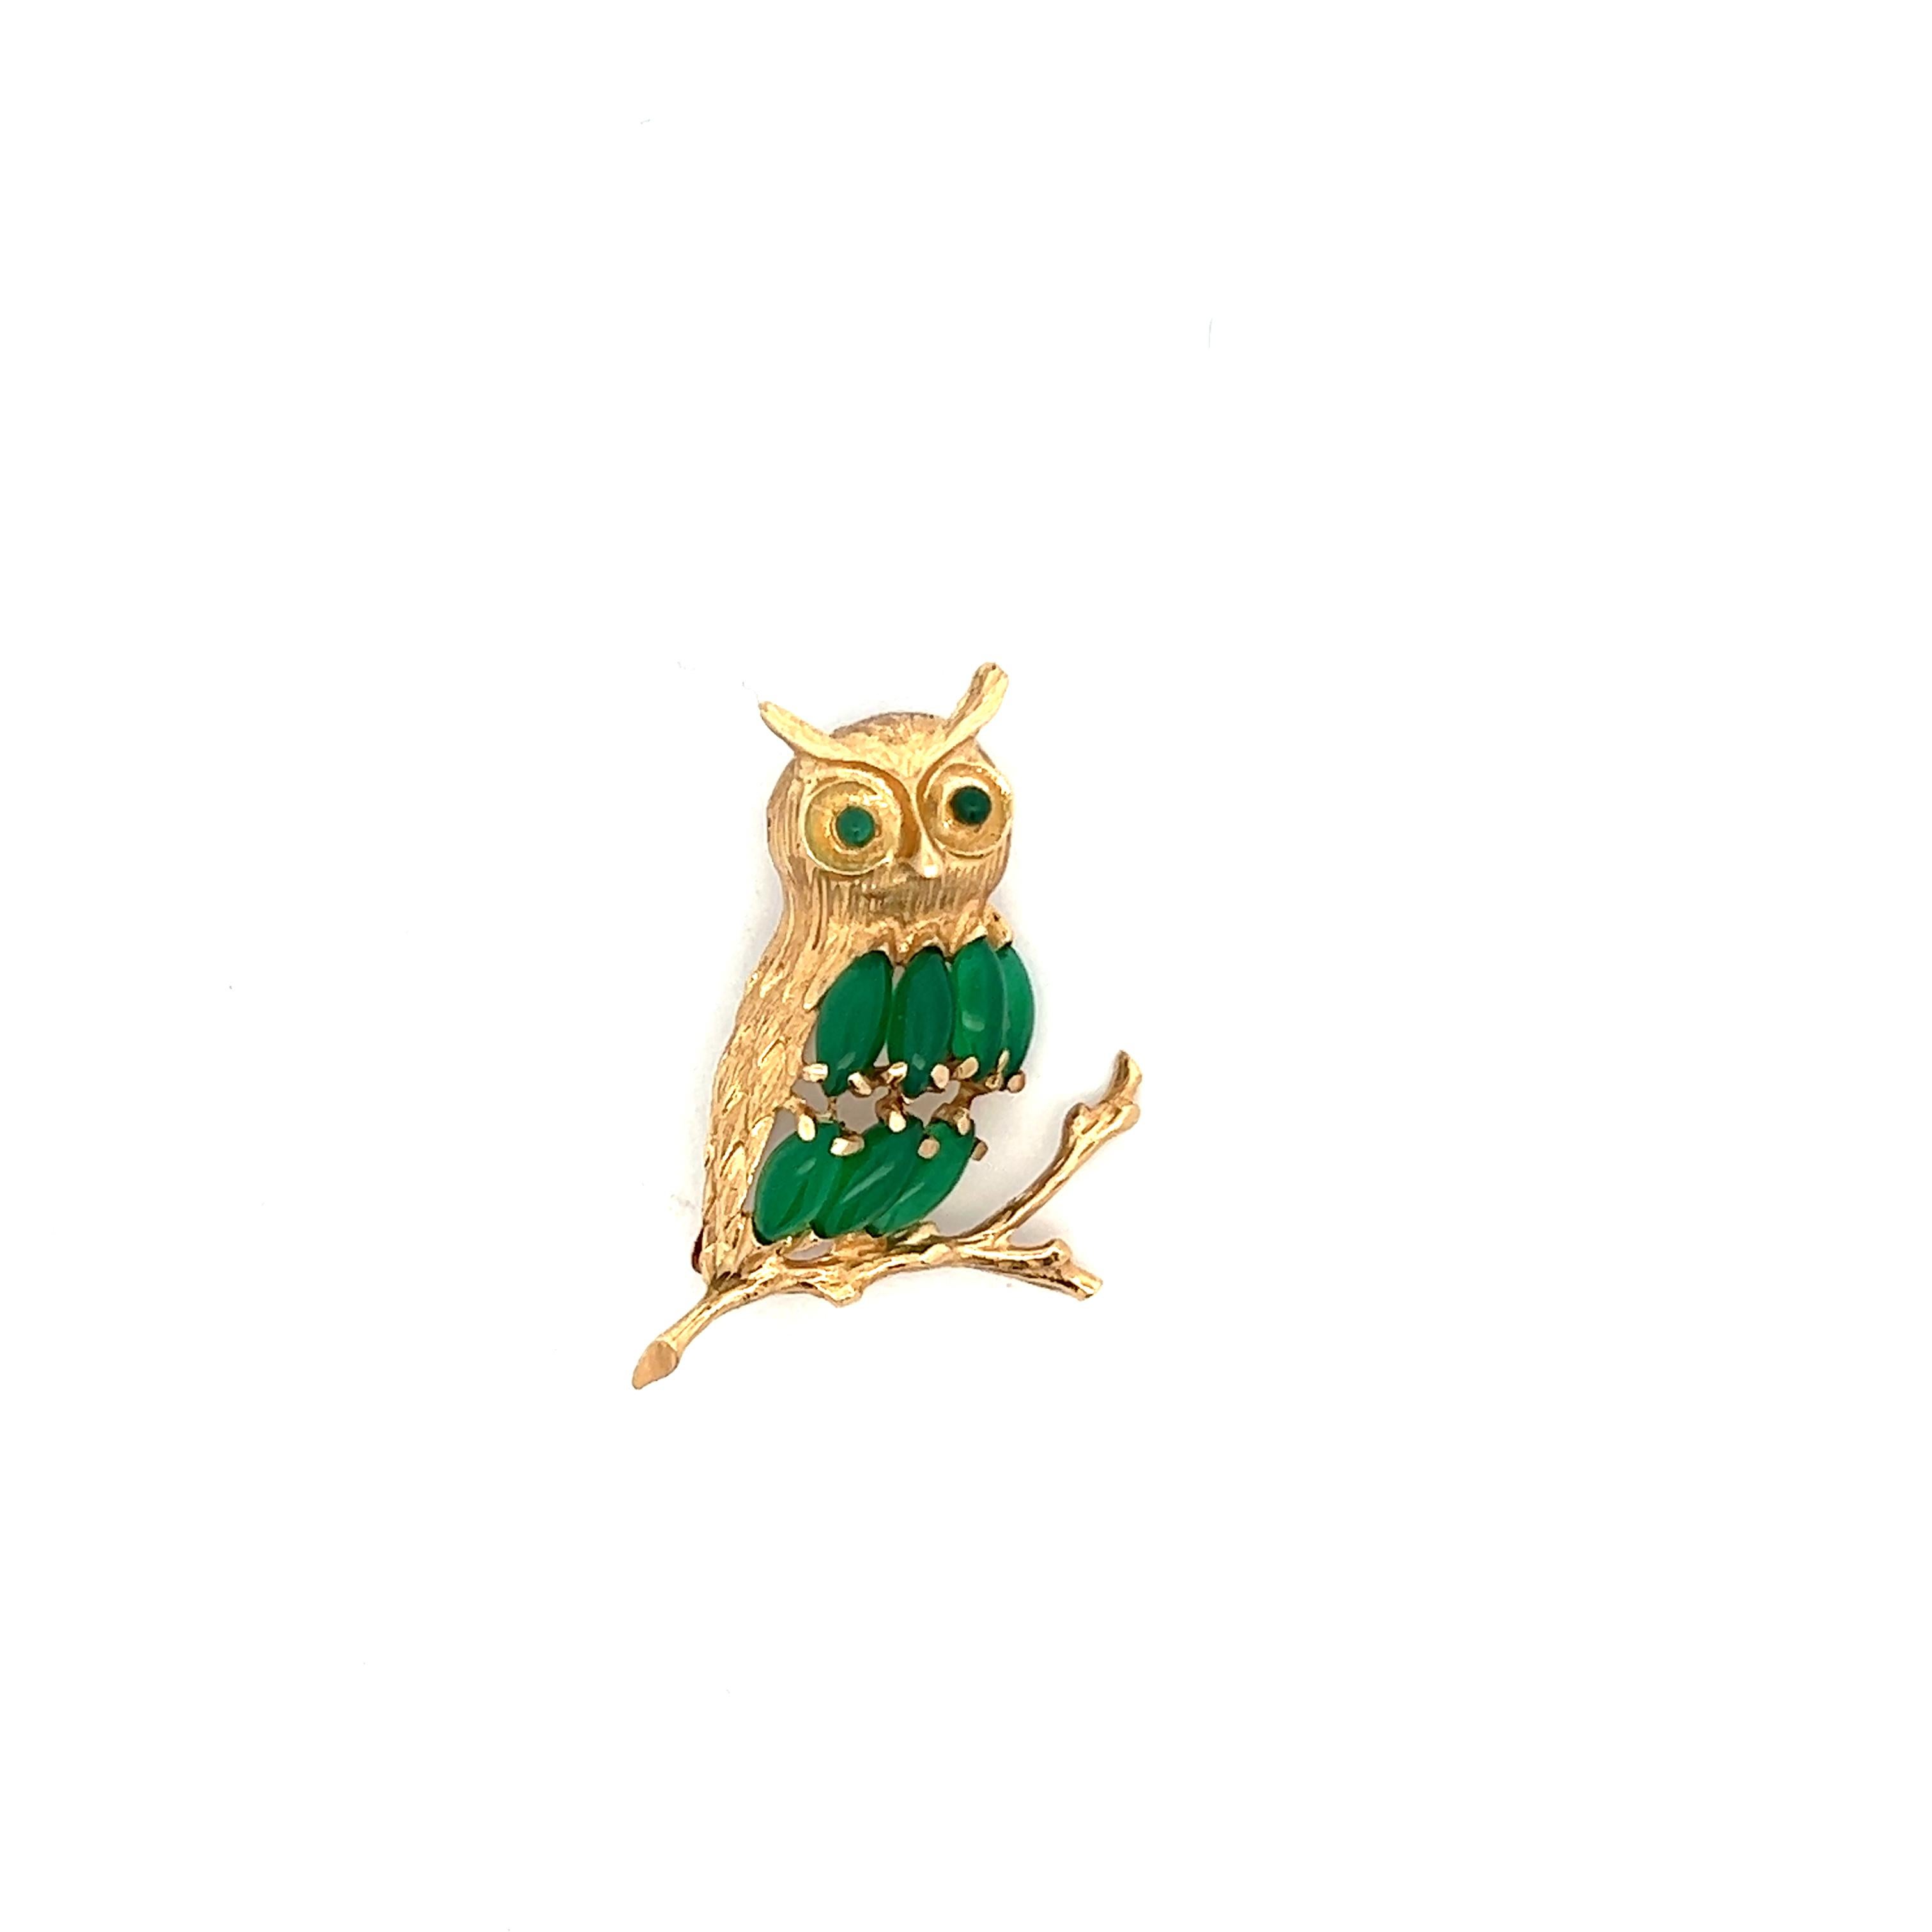 This beautiful owl pin is made in 14k yellow gold with chalcedony eyes and body. This pin is perfect for any owl lover or chalcedony lover, as is shows the embodiment of both. The green  chalcedony provides beautiful contrast with the yellow gold